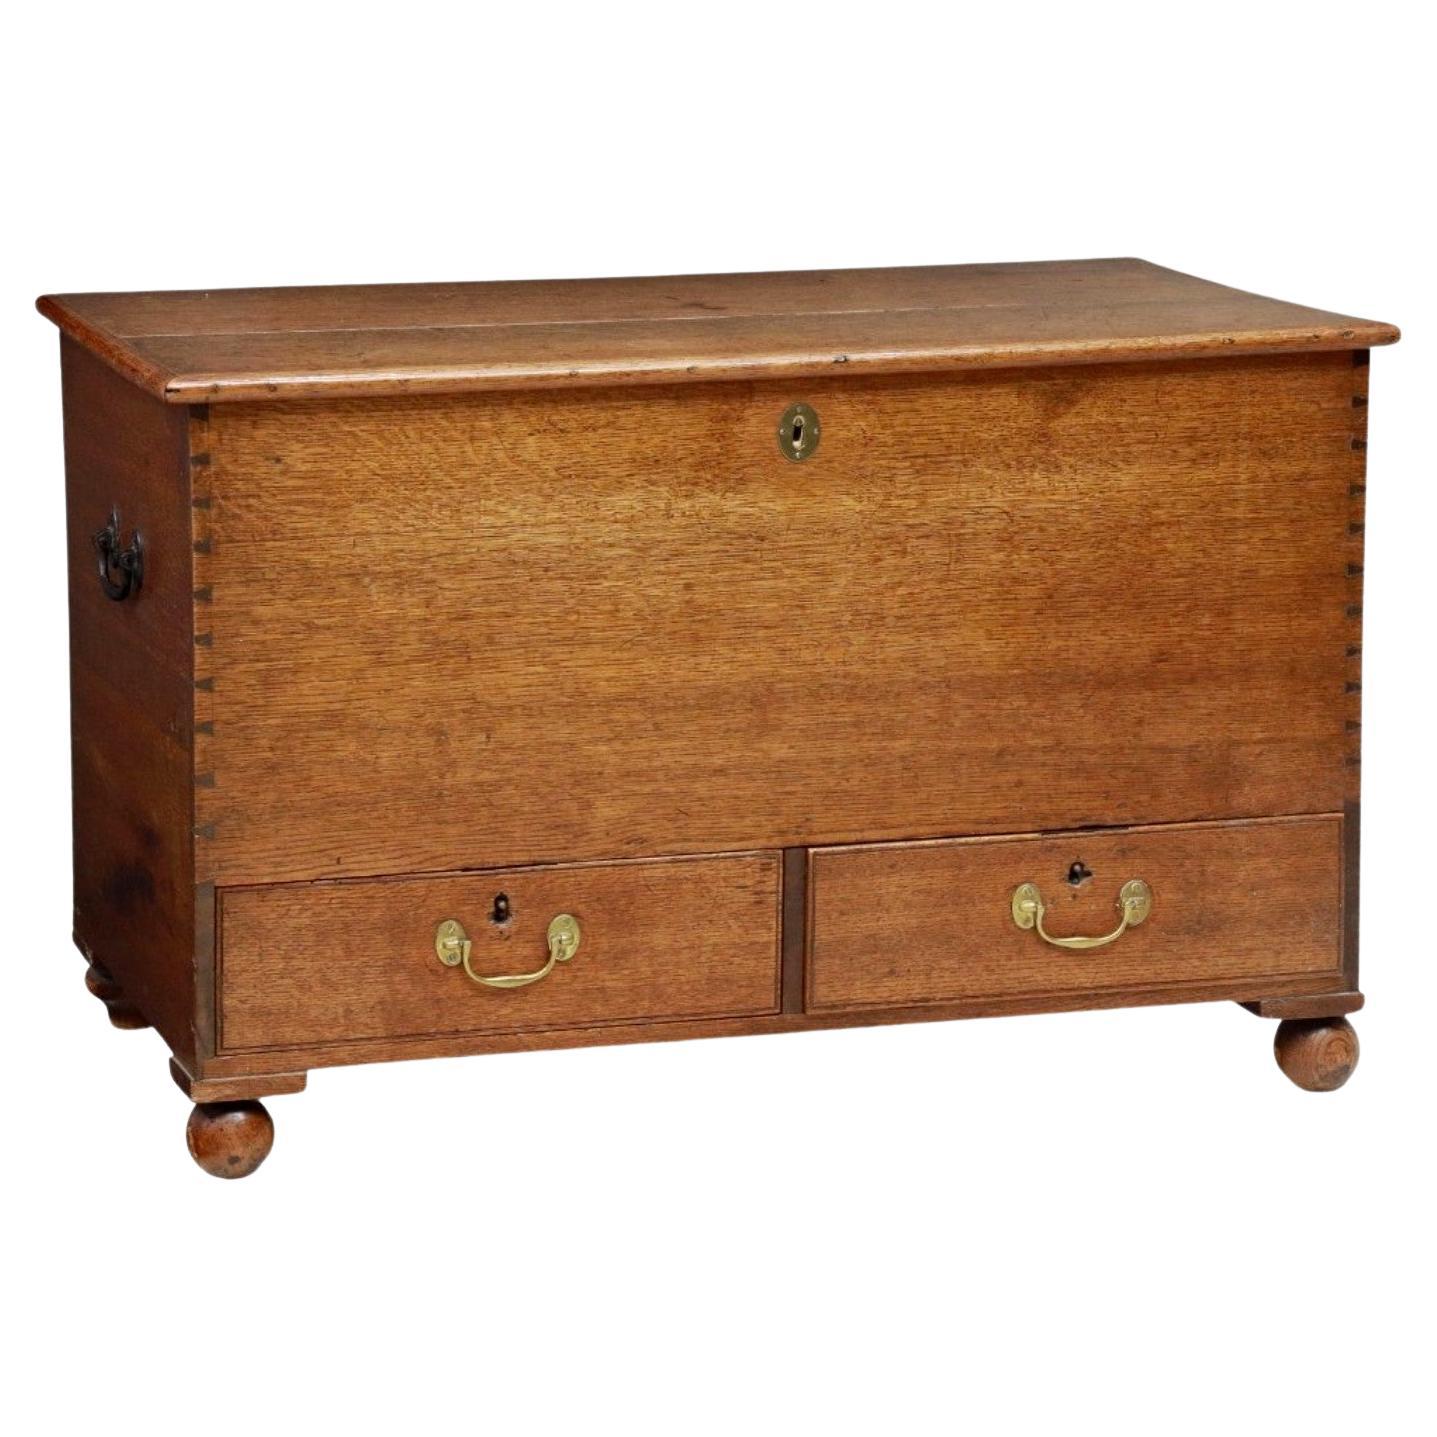 A Georgian era (1714-1837) English oak mule chest.

Born in the late 18th / early 19th century, during the reign of King George III (1760-1820), fine quality craftsmanship and construction, hand-crafted of warm rich solid oak, used to store clothing